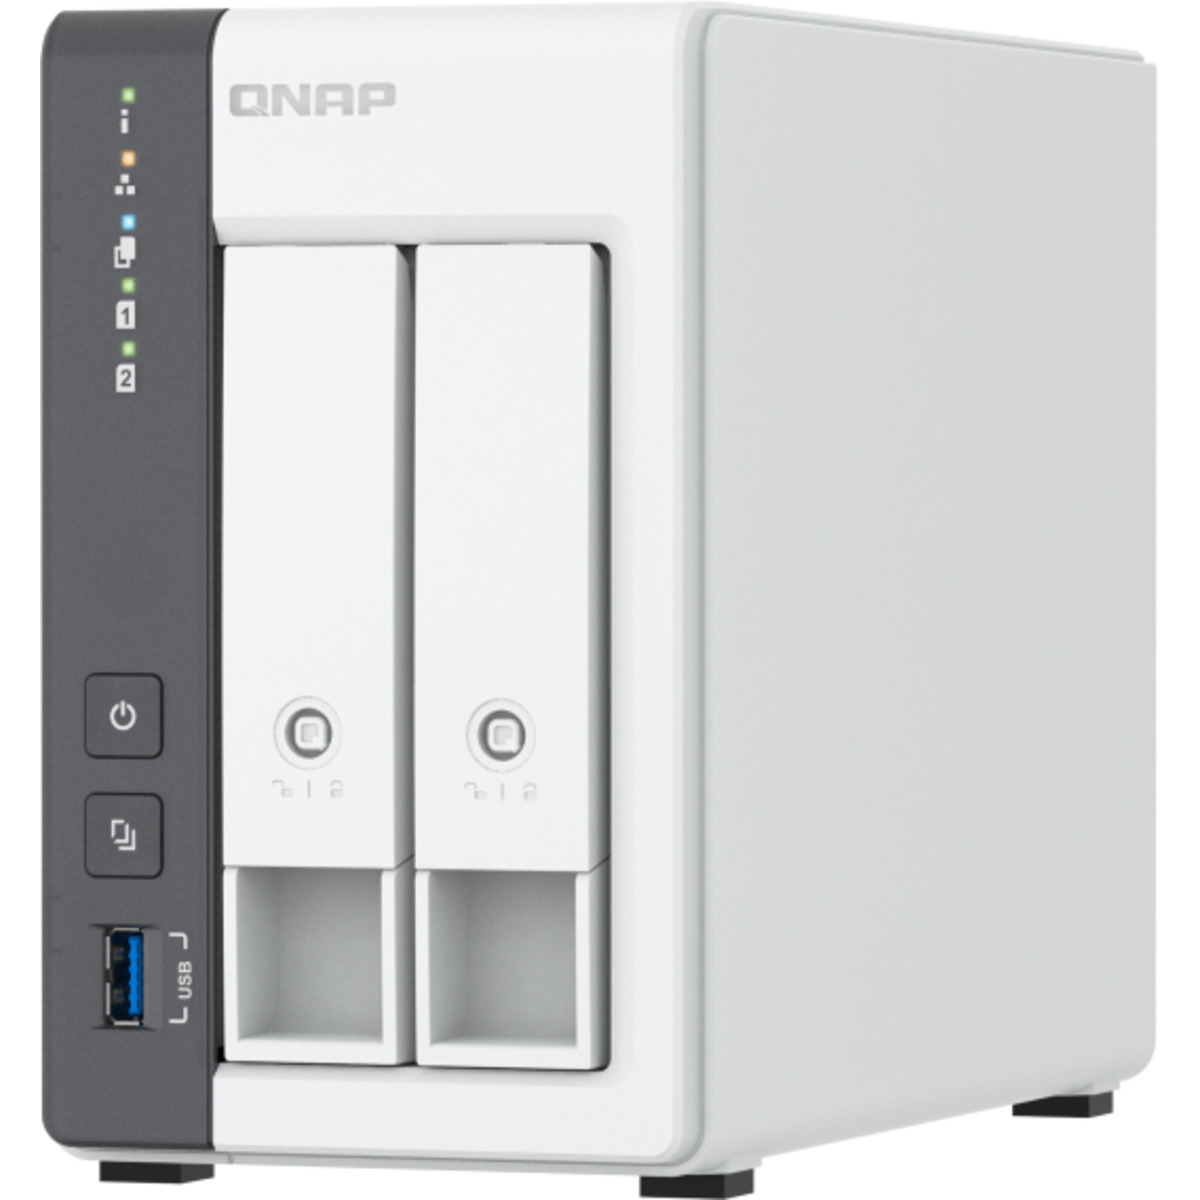 QNAP TS-216G 28tb 2-Bay Desktop Personal / Basic Home / Small Office NAS - Network Attached Storage Device 2x14tb Toshiba Enterprise Capacity MG07ACA14TE 3.5 7200rpm SATA 6Gb/s HDD ENTERPRISE Class Drives Installed - Burn-In Tested TS-216G